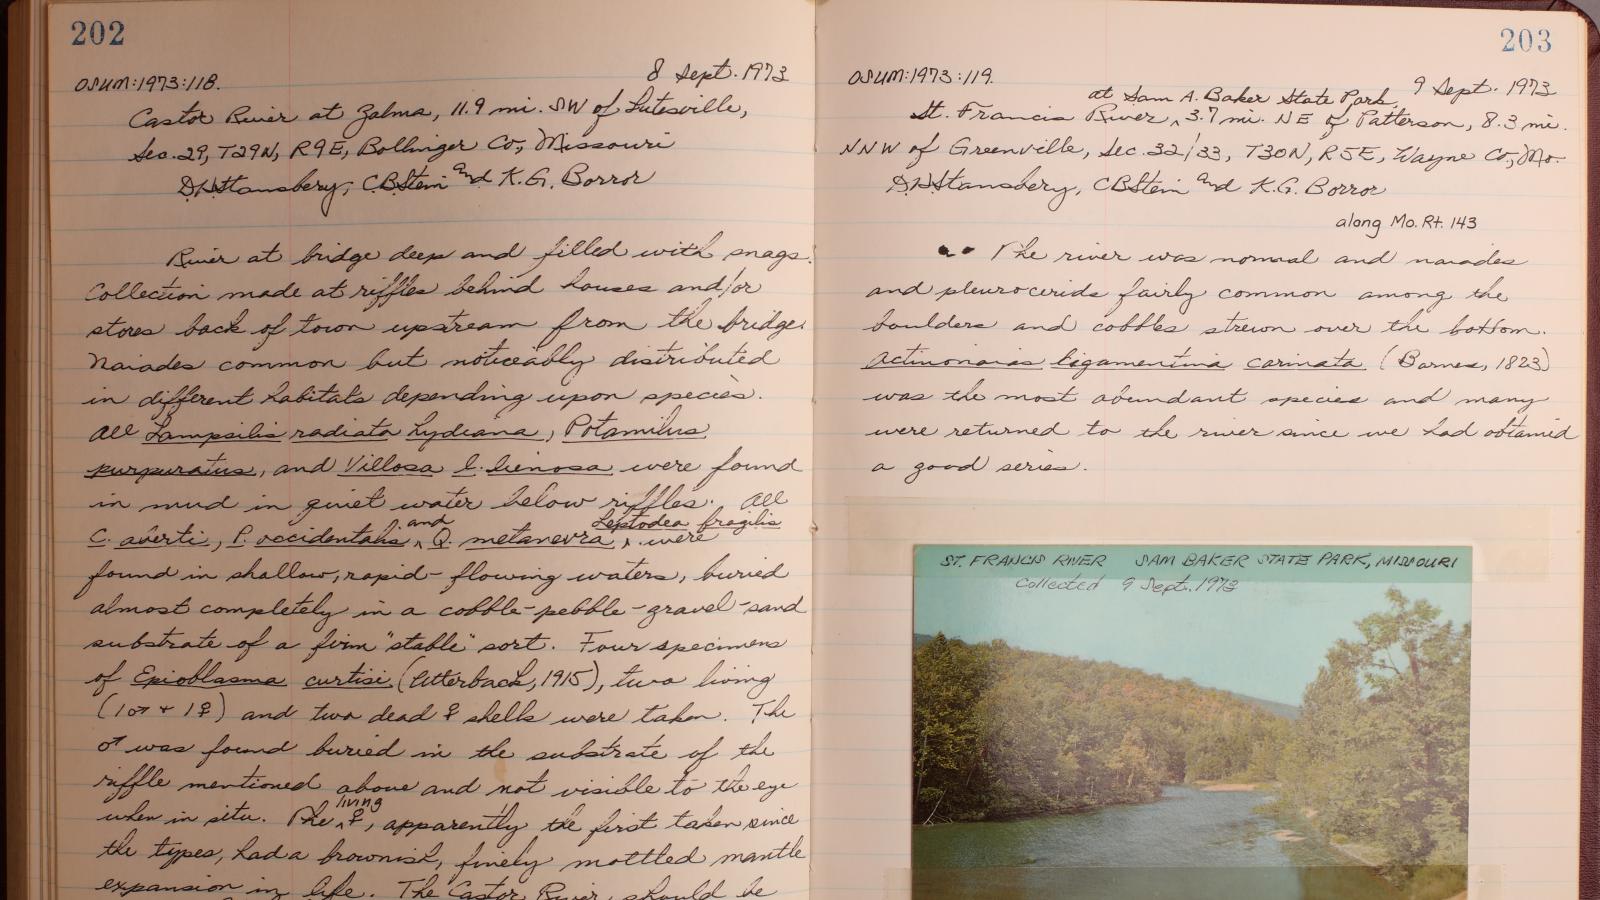 Photo of a field notebook written by David H. Stansbery, former curator of mollusks at OSUMBD. 